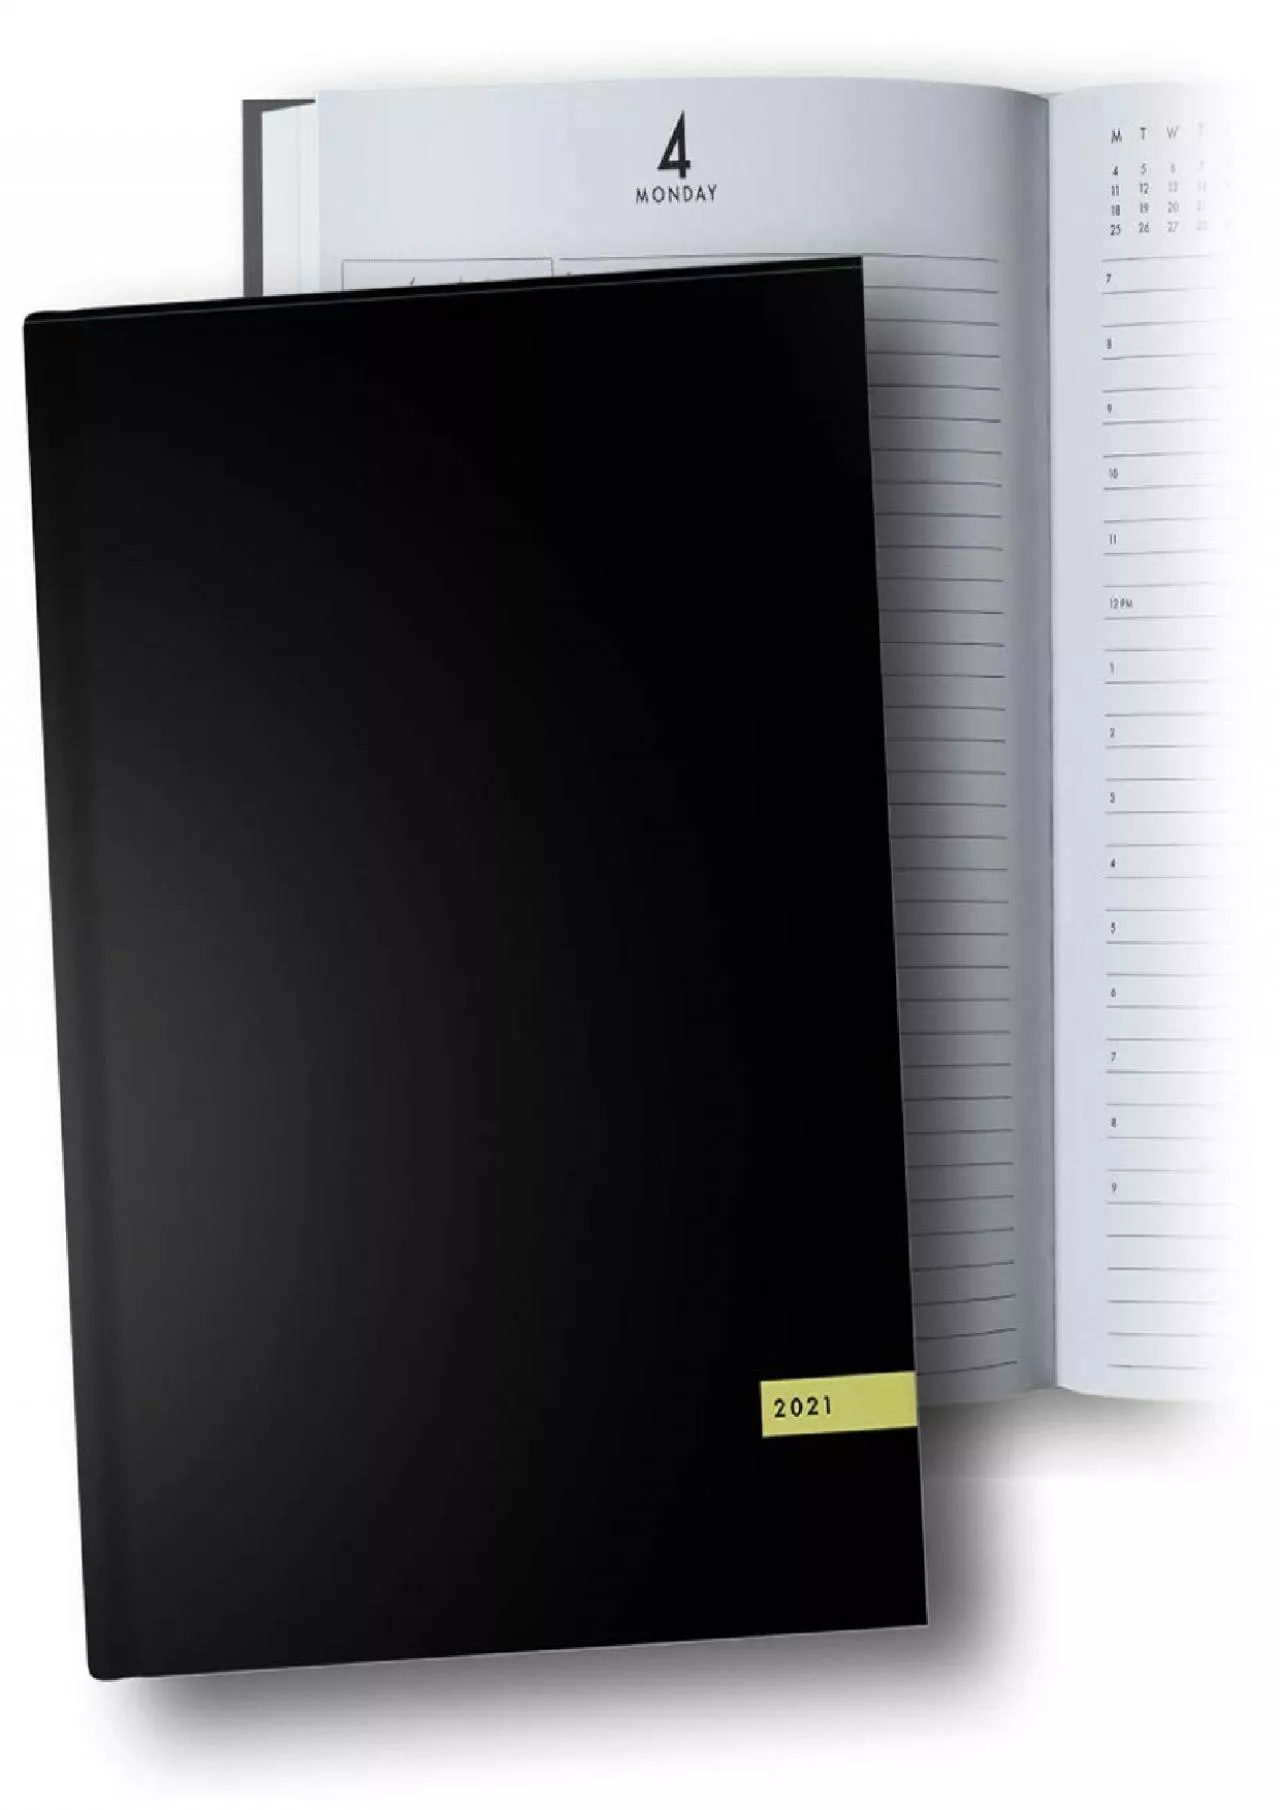 Day Planner 2021 Large: 8.5 x 11 2021 Daily Planner Hardcover 1 Page per Day Jan - Dec